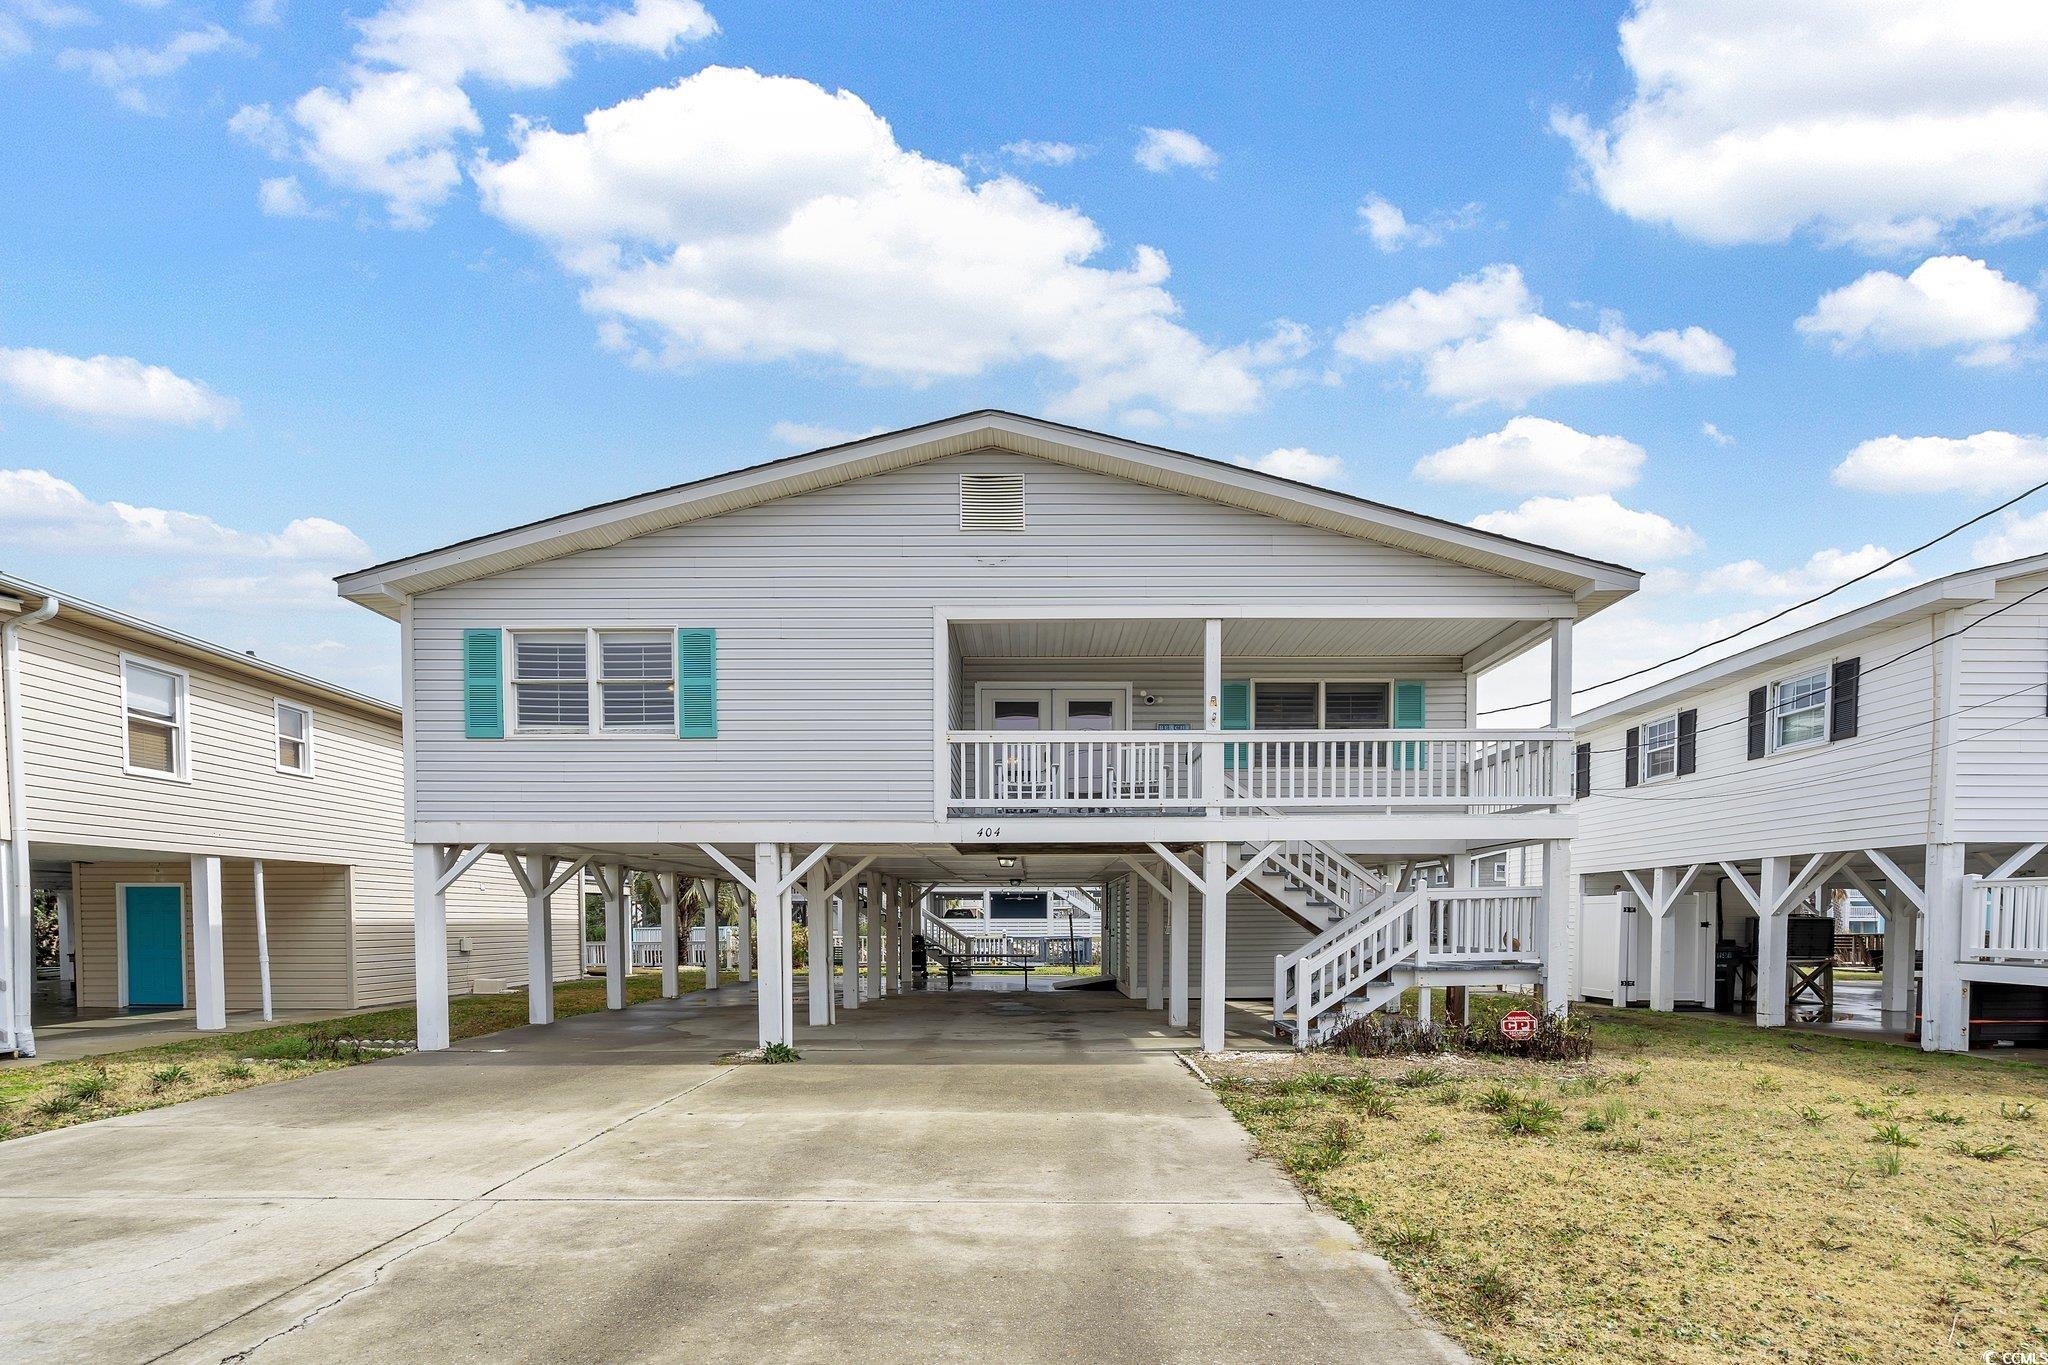 this is the perfect home, second home or airbnb!  nestled along a channel in cherry grove beach, you have gorgeous views of the water.   the serene backyard is ideal for fishing, crabbing and kayaking and is big enough to accommodate a pool.  this raised beach home boasts 4 bedrooms and 3 full baths including a spacious master bedroom with private on suite bath.  one of the best features of this home is the location!  just .3 miles from the beach and .4 miles from the cherry grove fishing pier!  just .5 miles from sea mountain highway which has many shops and restaurants for you to enjoy.  updated, fully furnished and perfectly decorated for a 5 star airbnb, this home is completely turn key!  there are two locked owners closets so your personal items can be conveniently enjoyed when you visit.  below the home is an outdoor shower and storage space for a golf cart and all of your beach gear.  there is also a private fishing dock right out back.  you will love that the roof was installed in 2016, hvac in 2017 and water heater in 2022.  be sure to check out the immersive 3d tour and don’t miss out on this gem!  don't wait! - schedule a showing before this gorgeous home is sold!